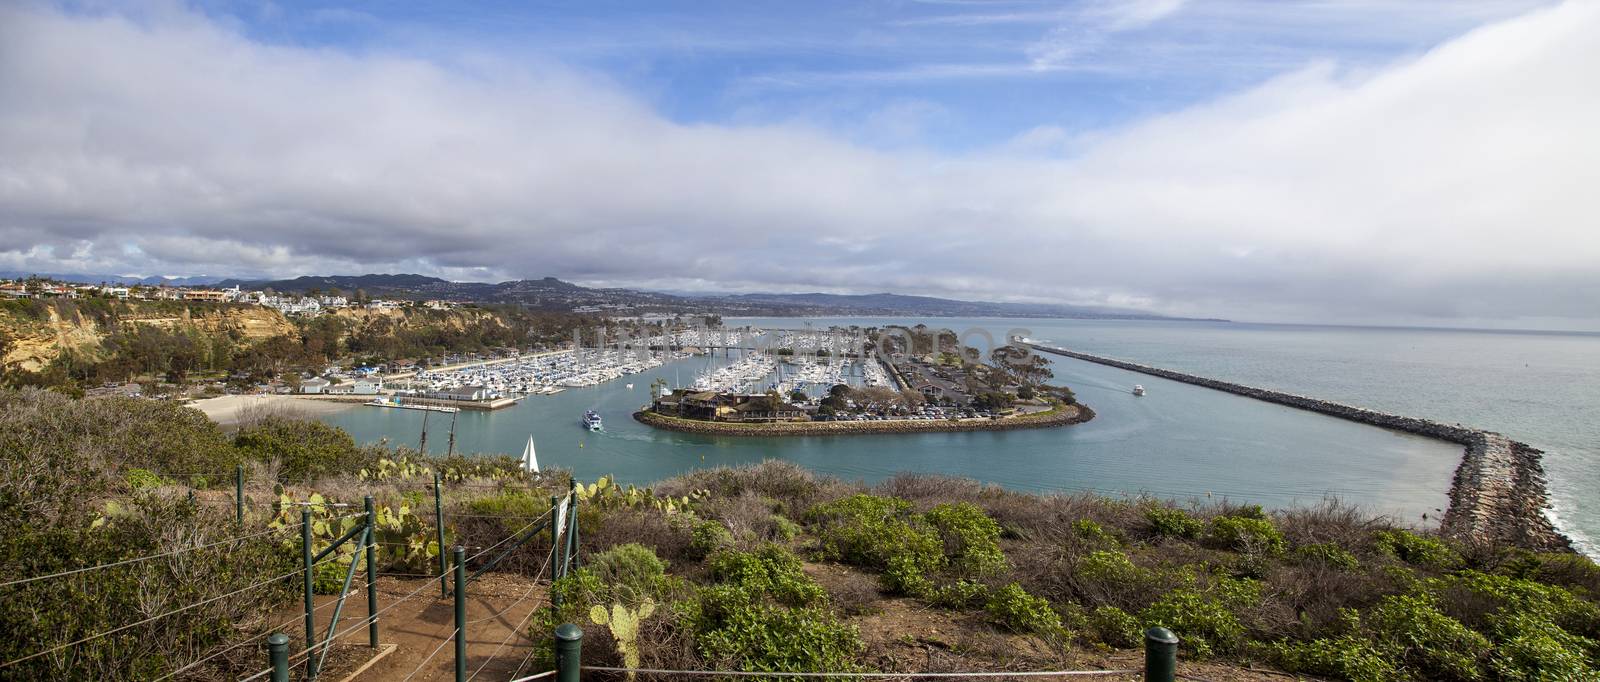 Dana Point Harbor from the hiking path above in Southern California, USA on a sunny day